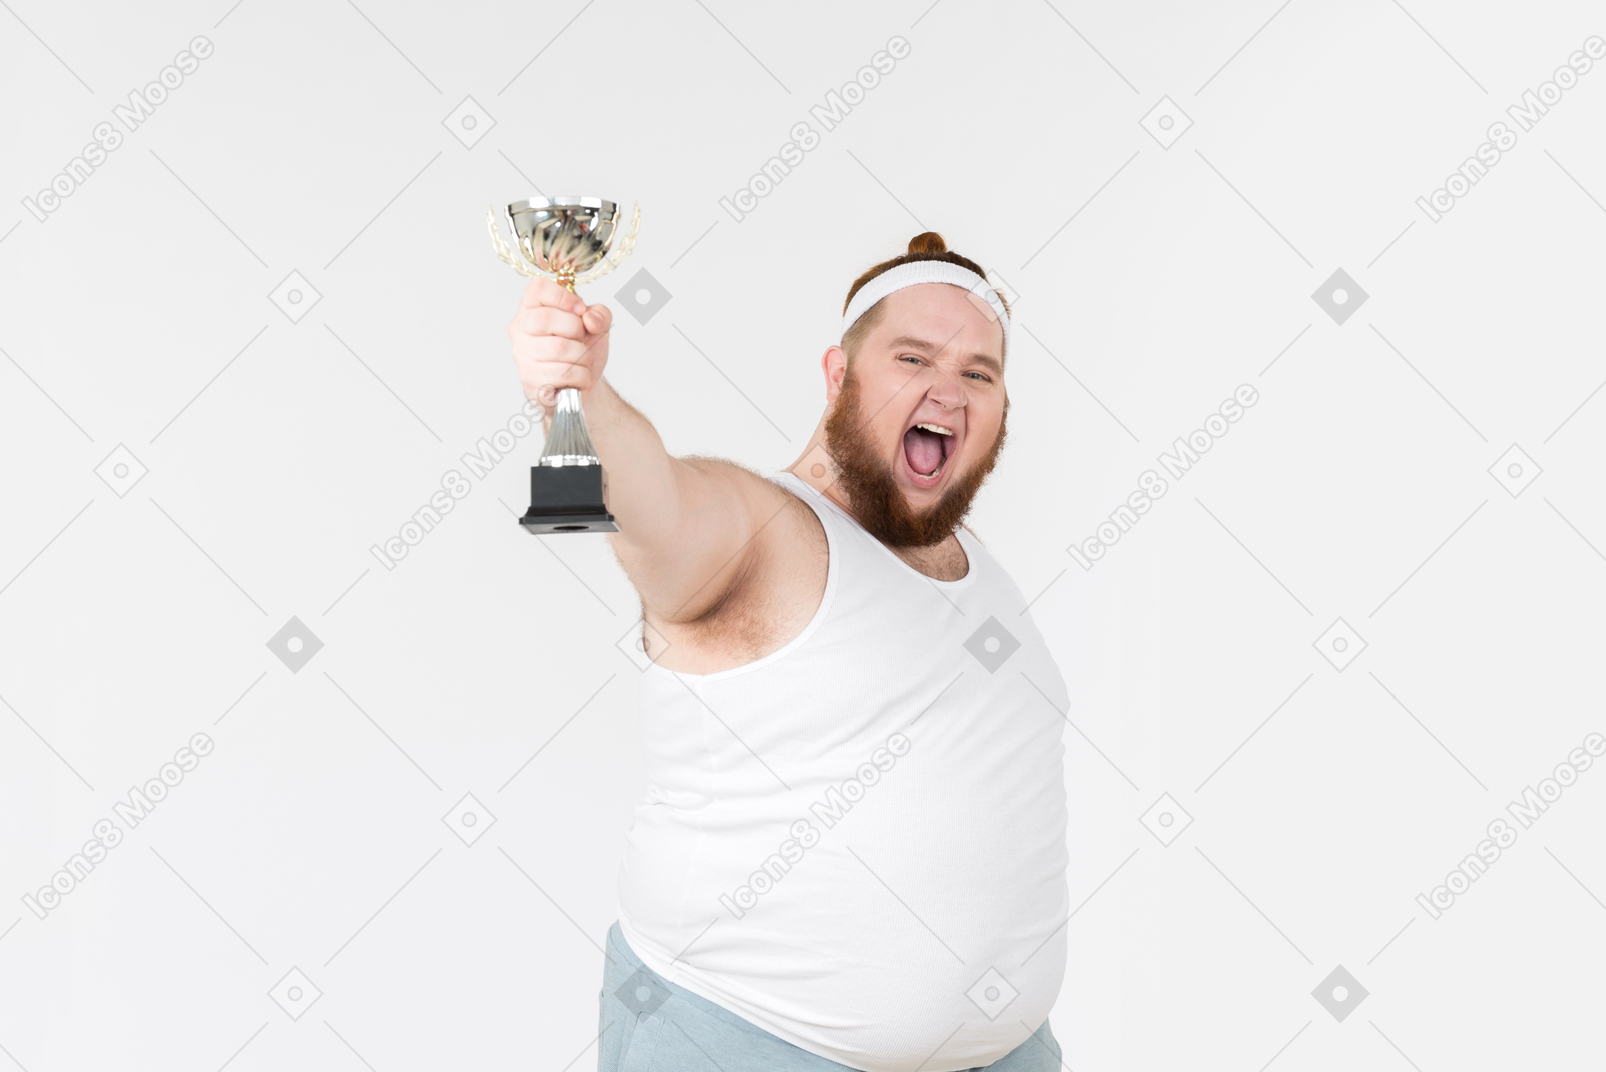 Big guy in sportswear screaming on excitement and holding trophy